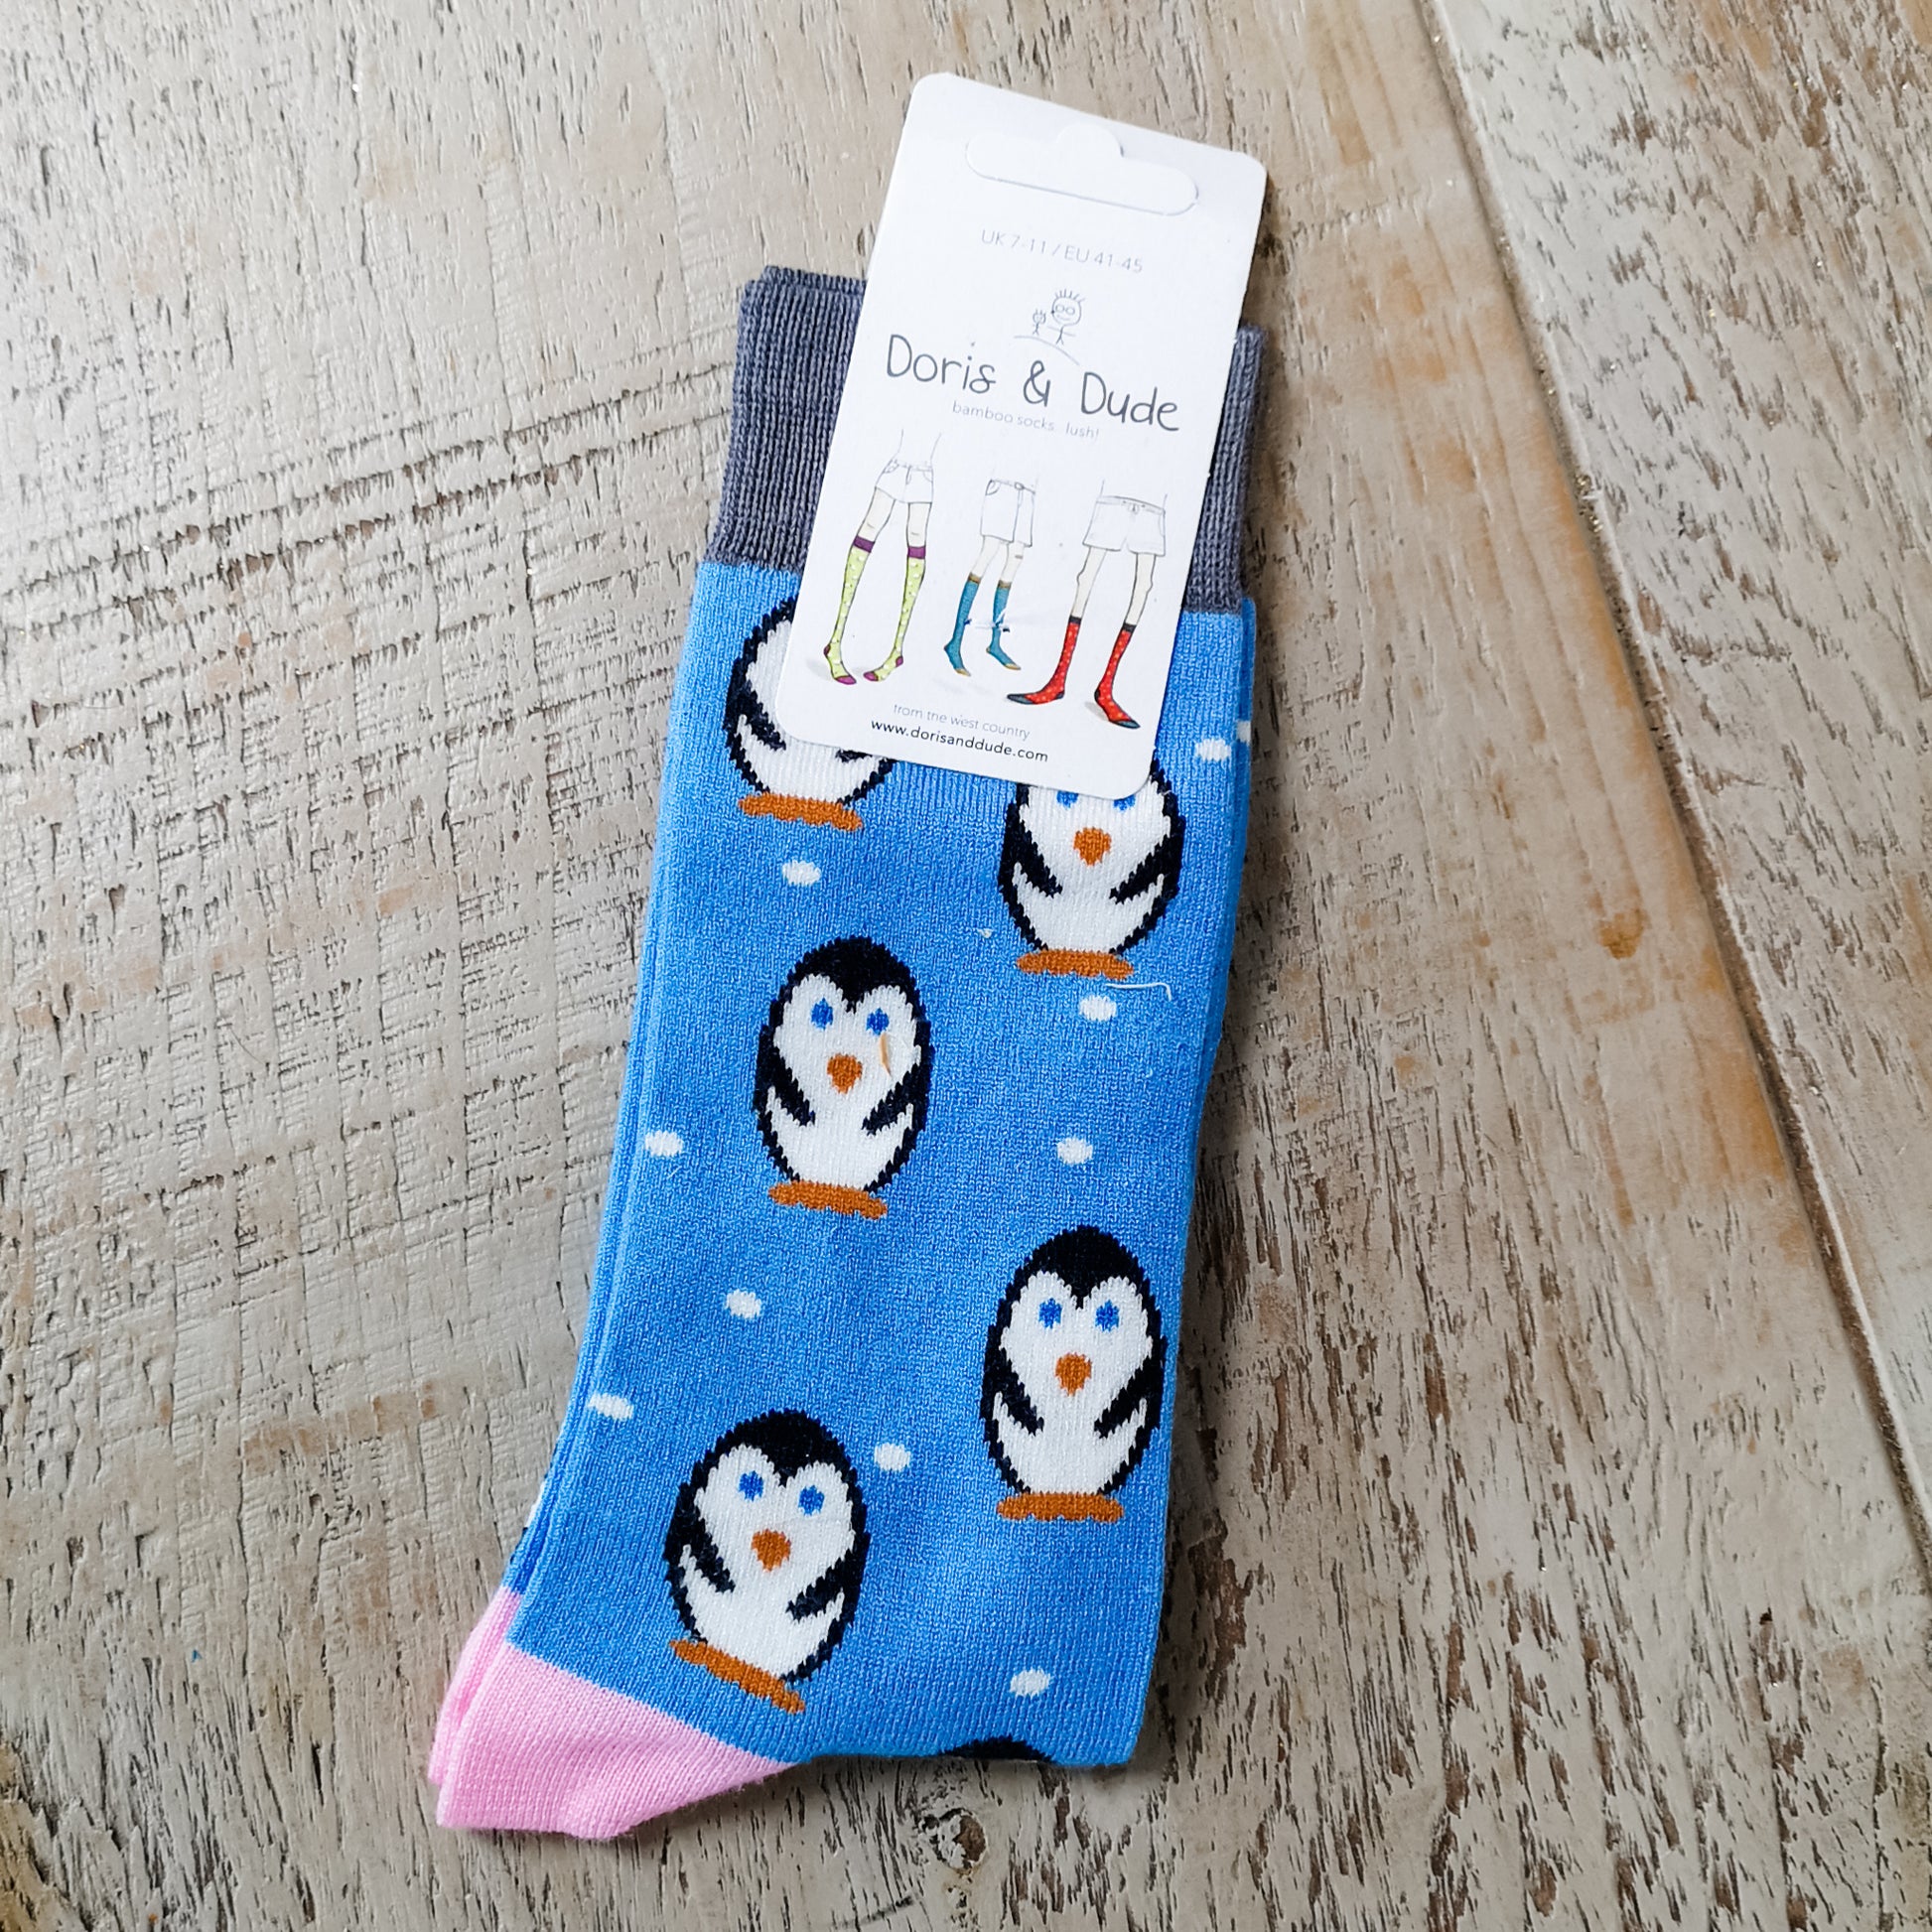 Penguin Socks Buy at Out of the Box Gifts